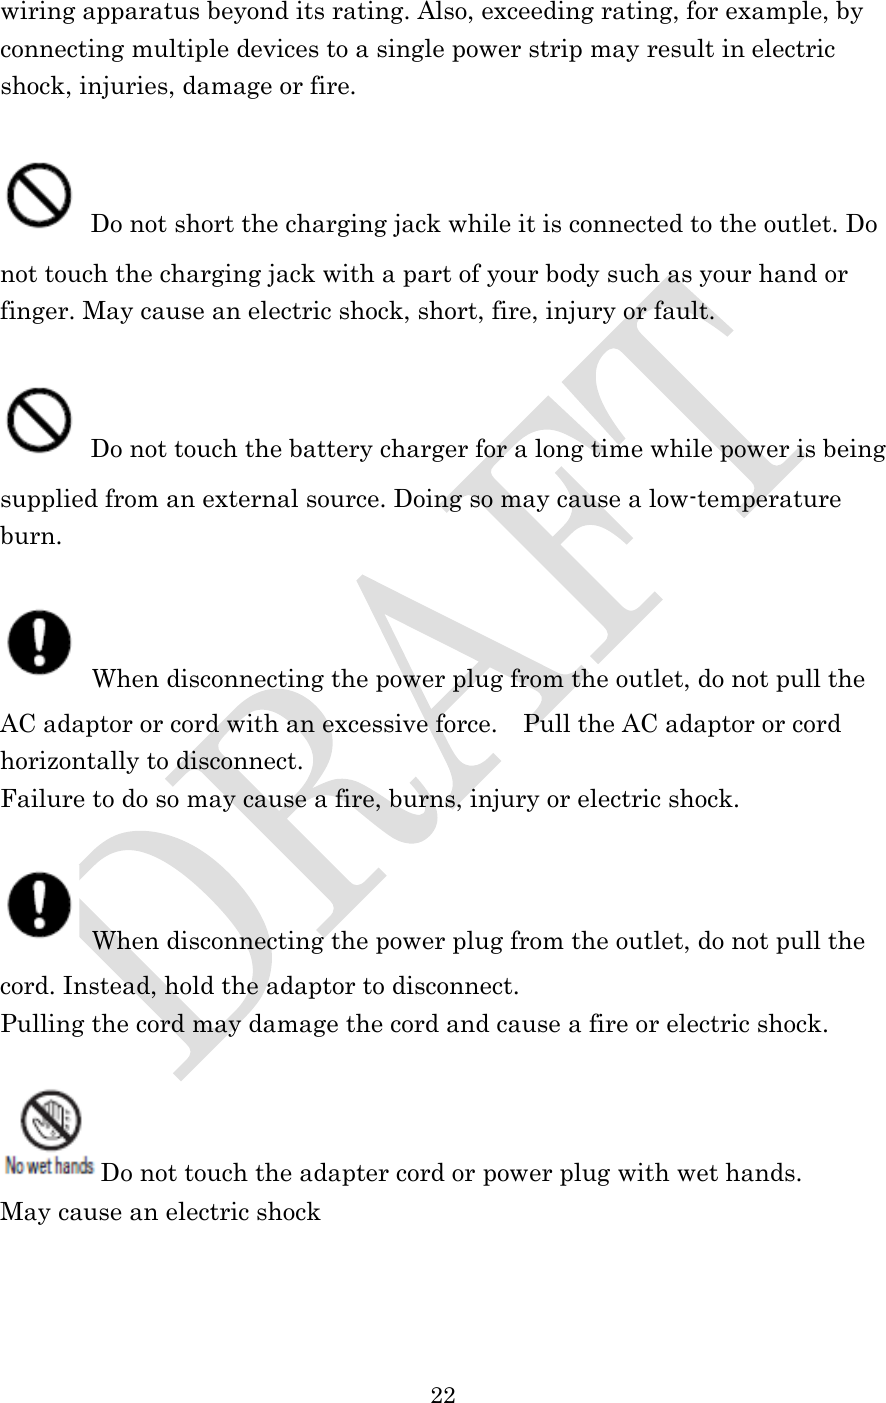  22  wiring apparatus beyond its rating. Also, exceeding rating, for example, by connecting multiple devices to a single power strip may result in electric shock, injuries, damage or fire.   Do not short the charging jack while it is connected to the outlet. Do not touch the charging jack with a part of your body such as your hand or finger. May cause an electric shock, short, fire, injury or fault.   Do not touch the battery charger for a long time while power is being supplied from an external source. Doing so may cause a low-temperature burn.   When disconnecting the power plug from the outlet, do not pull the AC adaptor or cord with an excessive force.    Pull the AC adaptor or cord horizontally to disconnect. Failure to do so may cause a fire, burns, injury or electric shock.   When disconnecting the power plug from the outlet, do not pull the cord. Instead, hold the adaptor to disconnect. Pulling the cord may damage the cord and cause a fire or electric shock.  Do not touch the adapter cord or power plug with wet hands. May cause an electric shock  